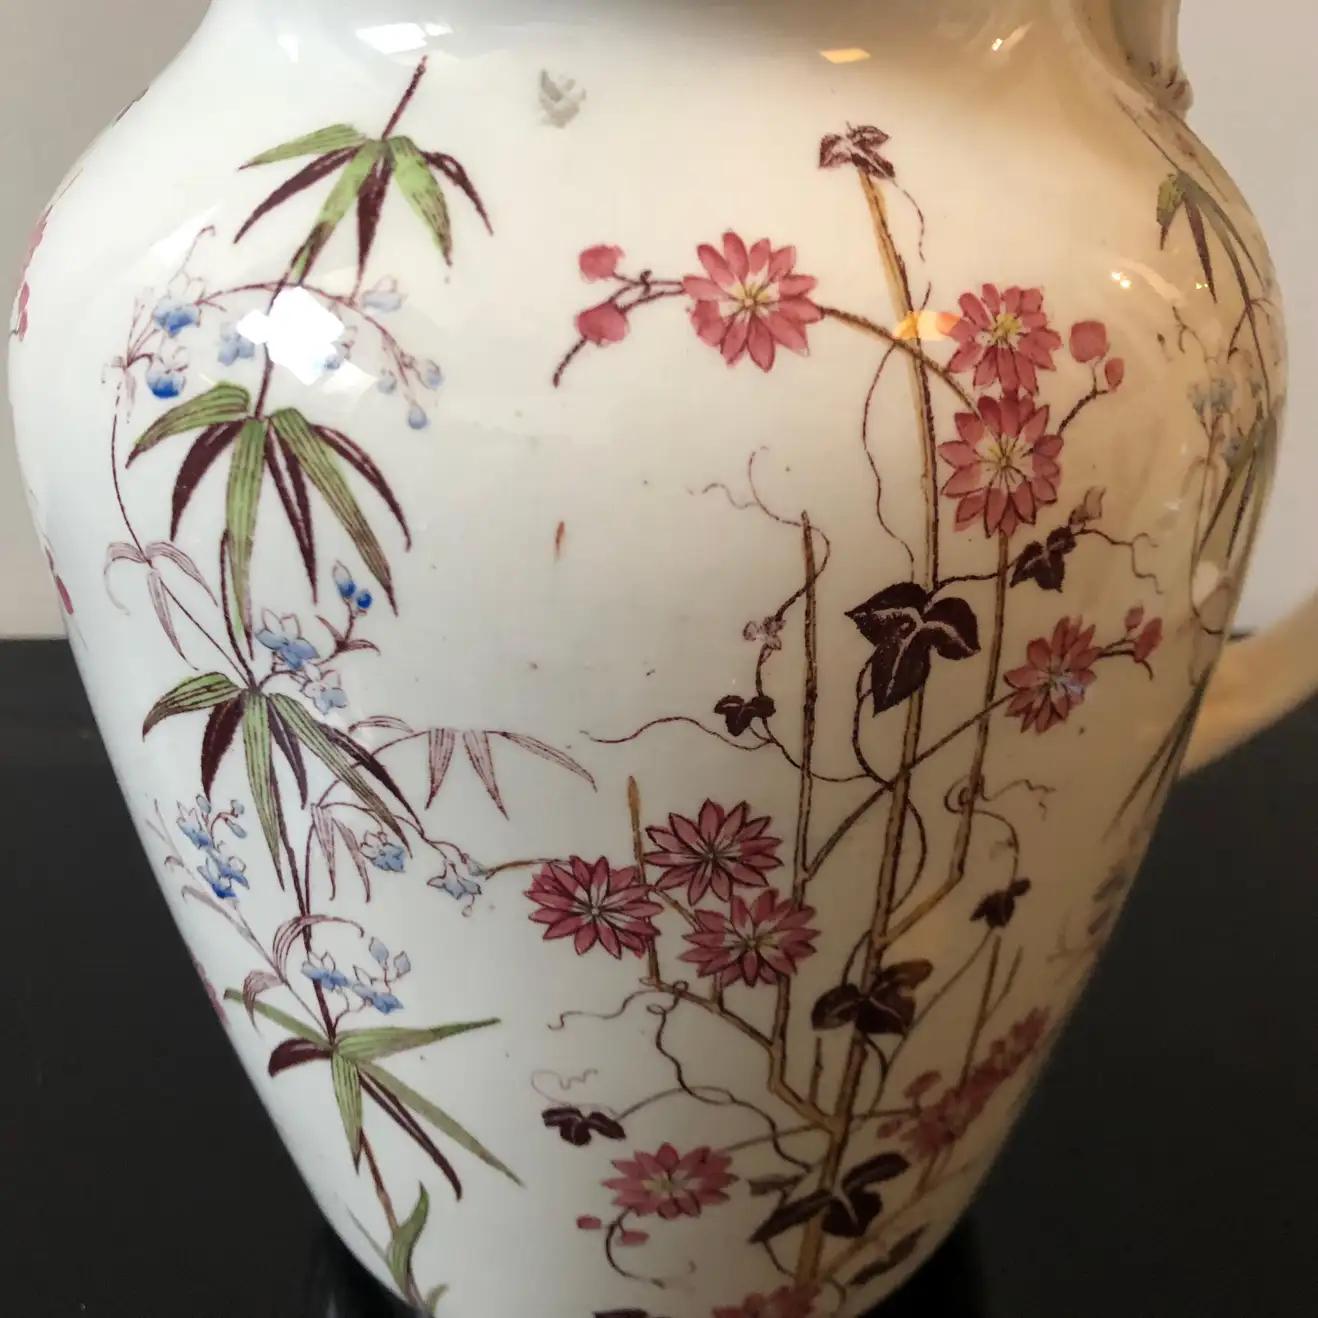 A ceramic jug with oriental decorations manufactured in Engladn in late 19th century. It's in perfect conditions.